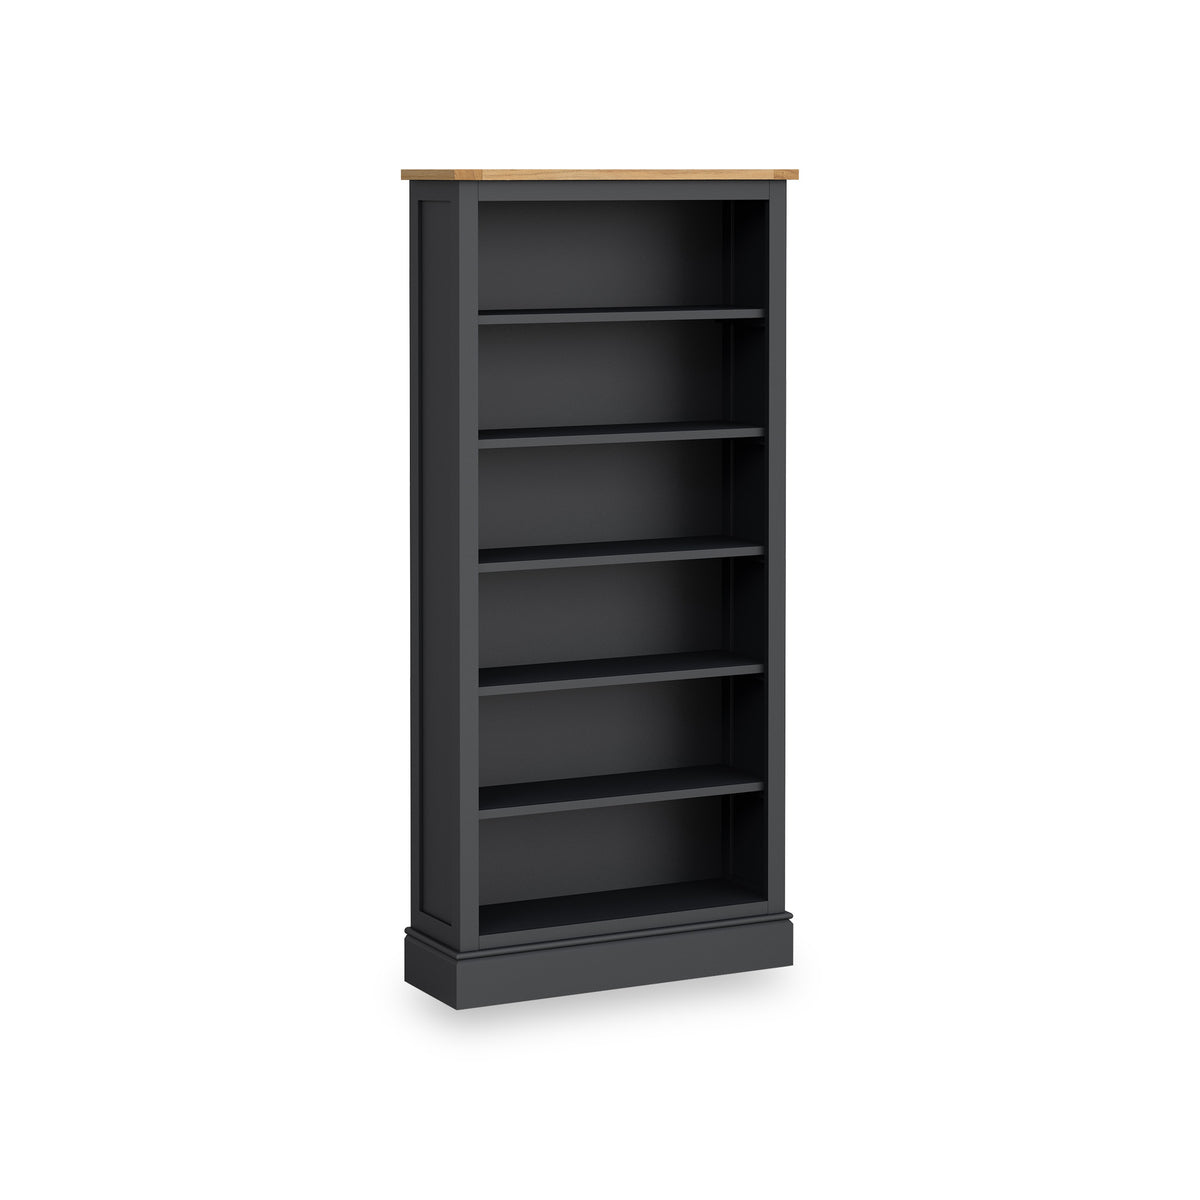 Bude Charcoal Large Bookcase with Painted Shelves from Roseland Furniture